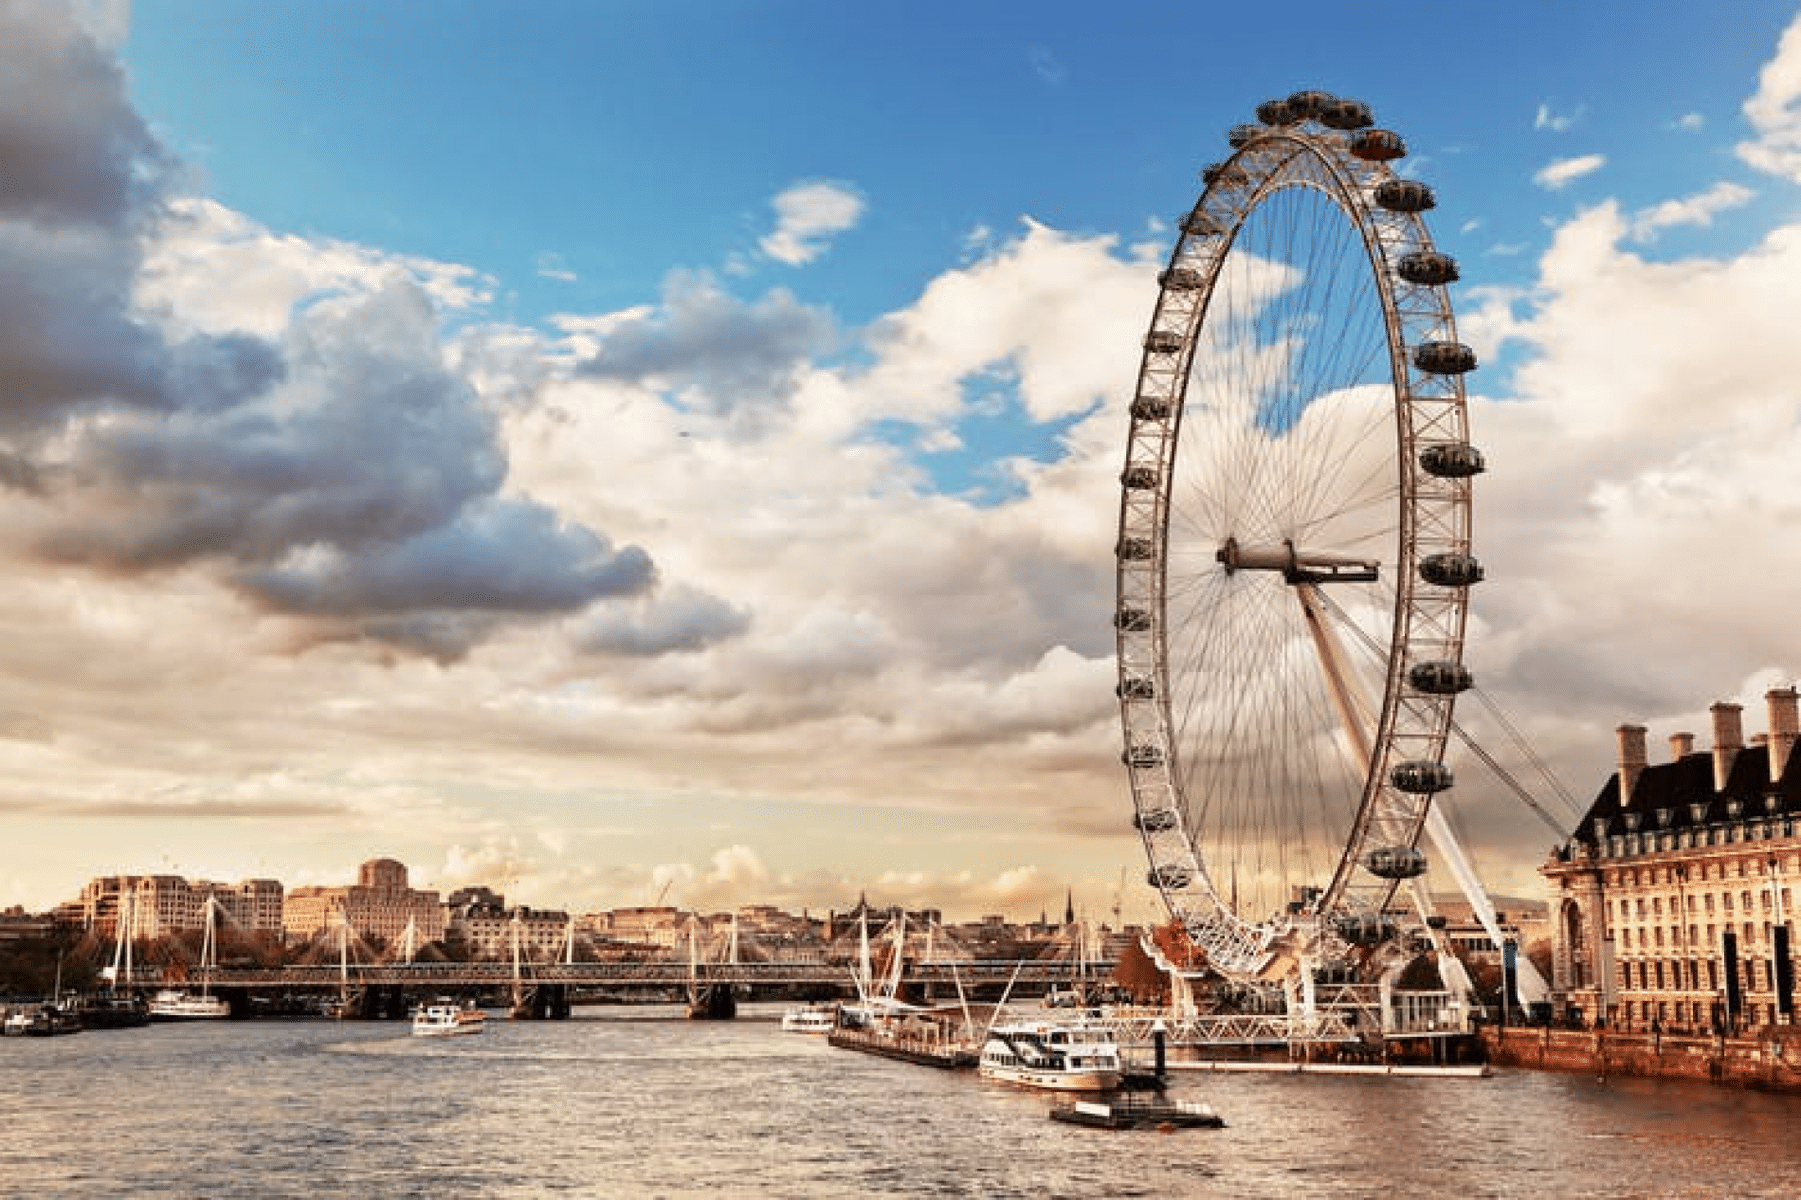 Get a cruise experience across river Thames and explore the popular attractions